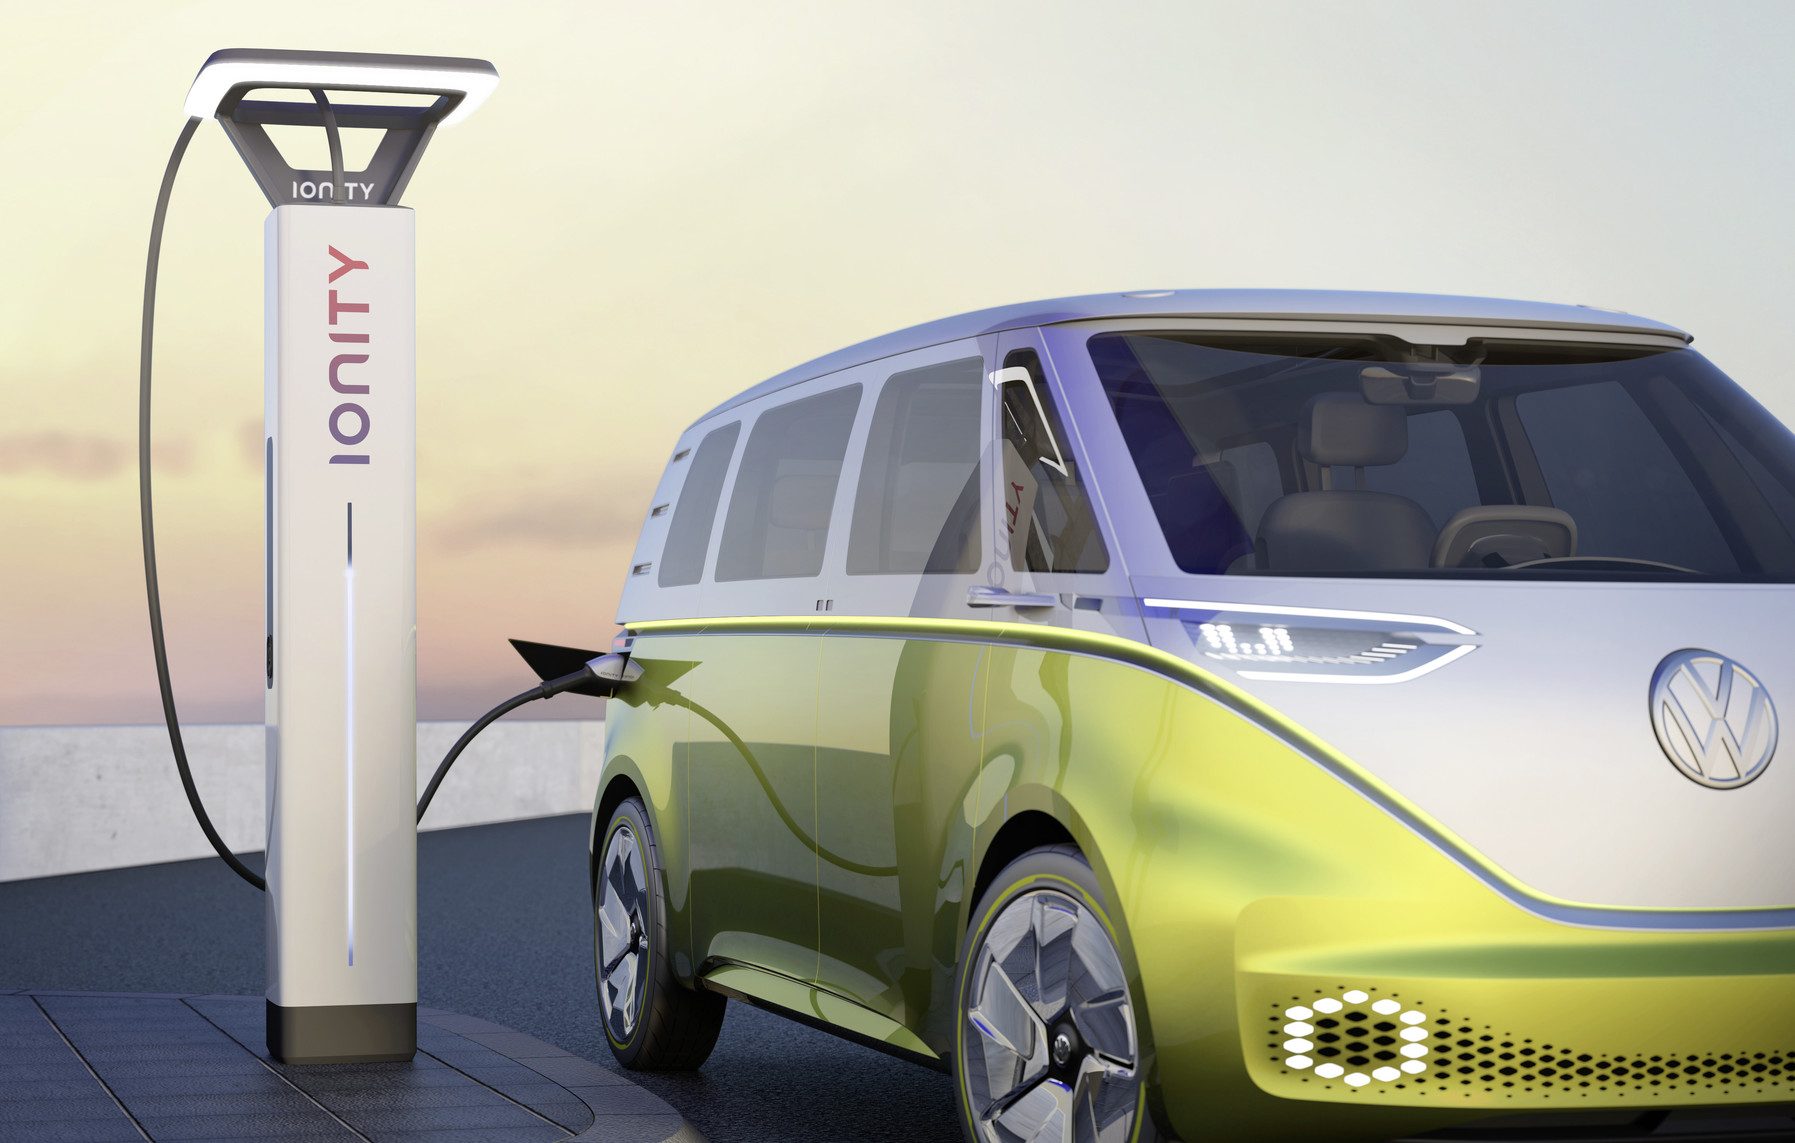 Volkswagen ID. BUZZ study charged at a IONITY high power charging station.